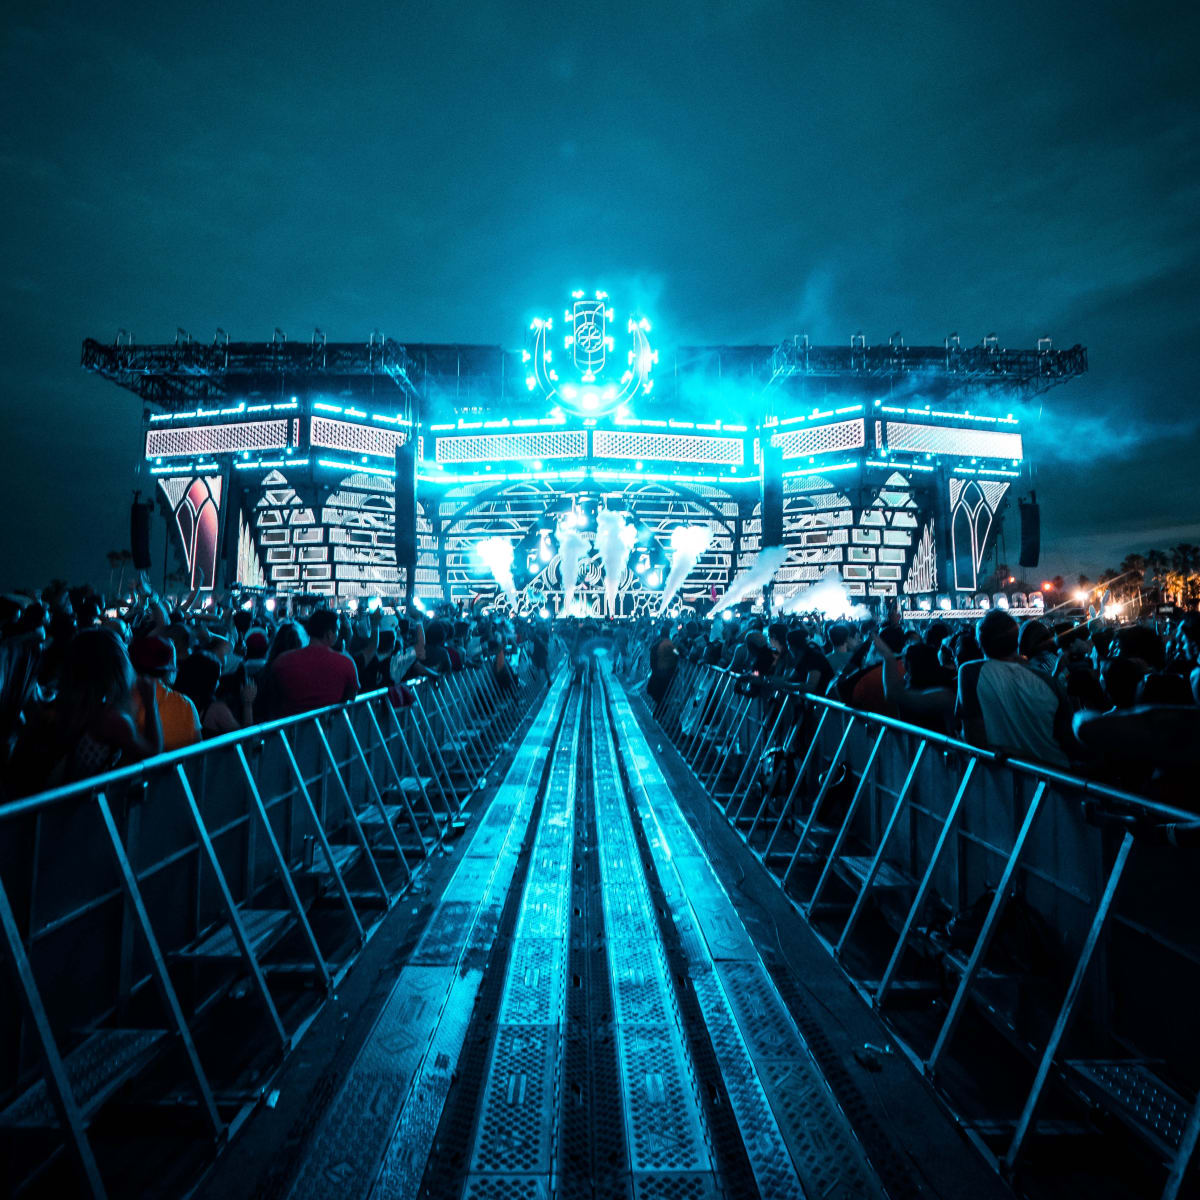 Ultra Music Festival Announces 2022 Daily Stage Programming, Closing Sets -   - The Latest Electronic Dance Music News, Reviews & Artists